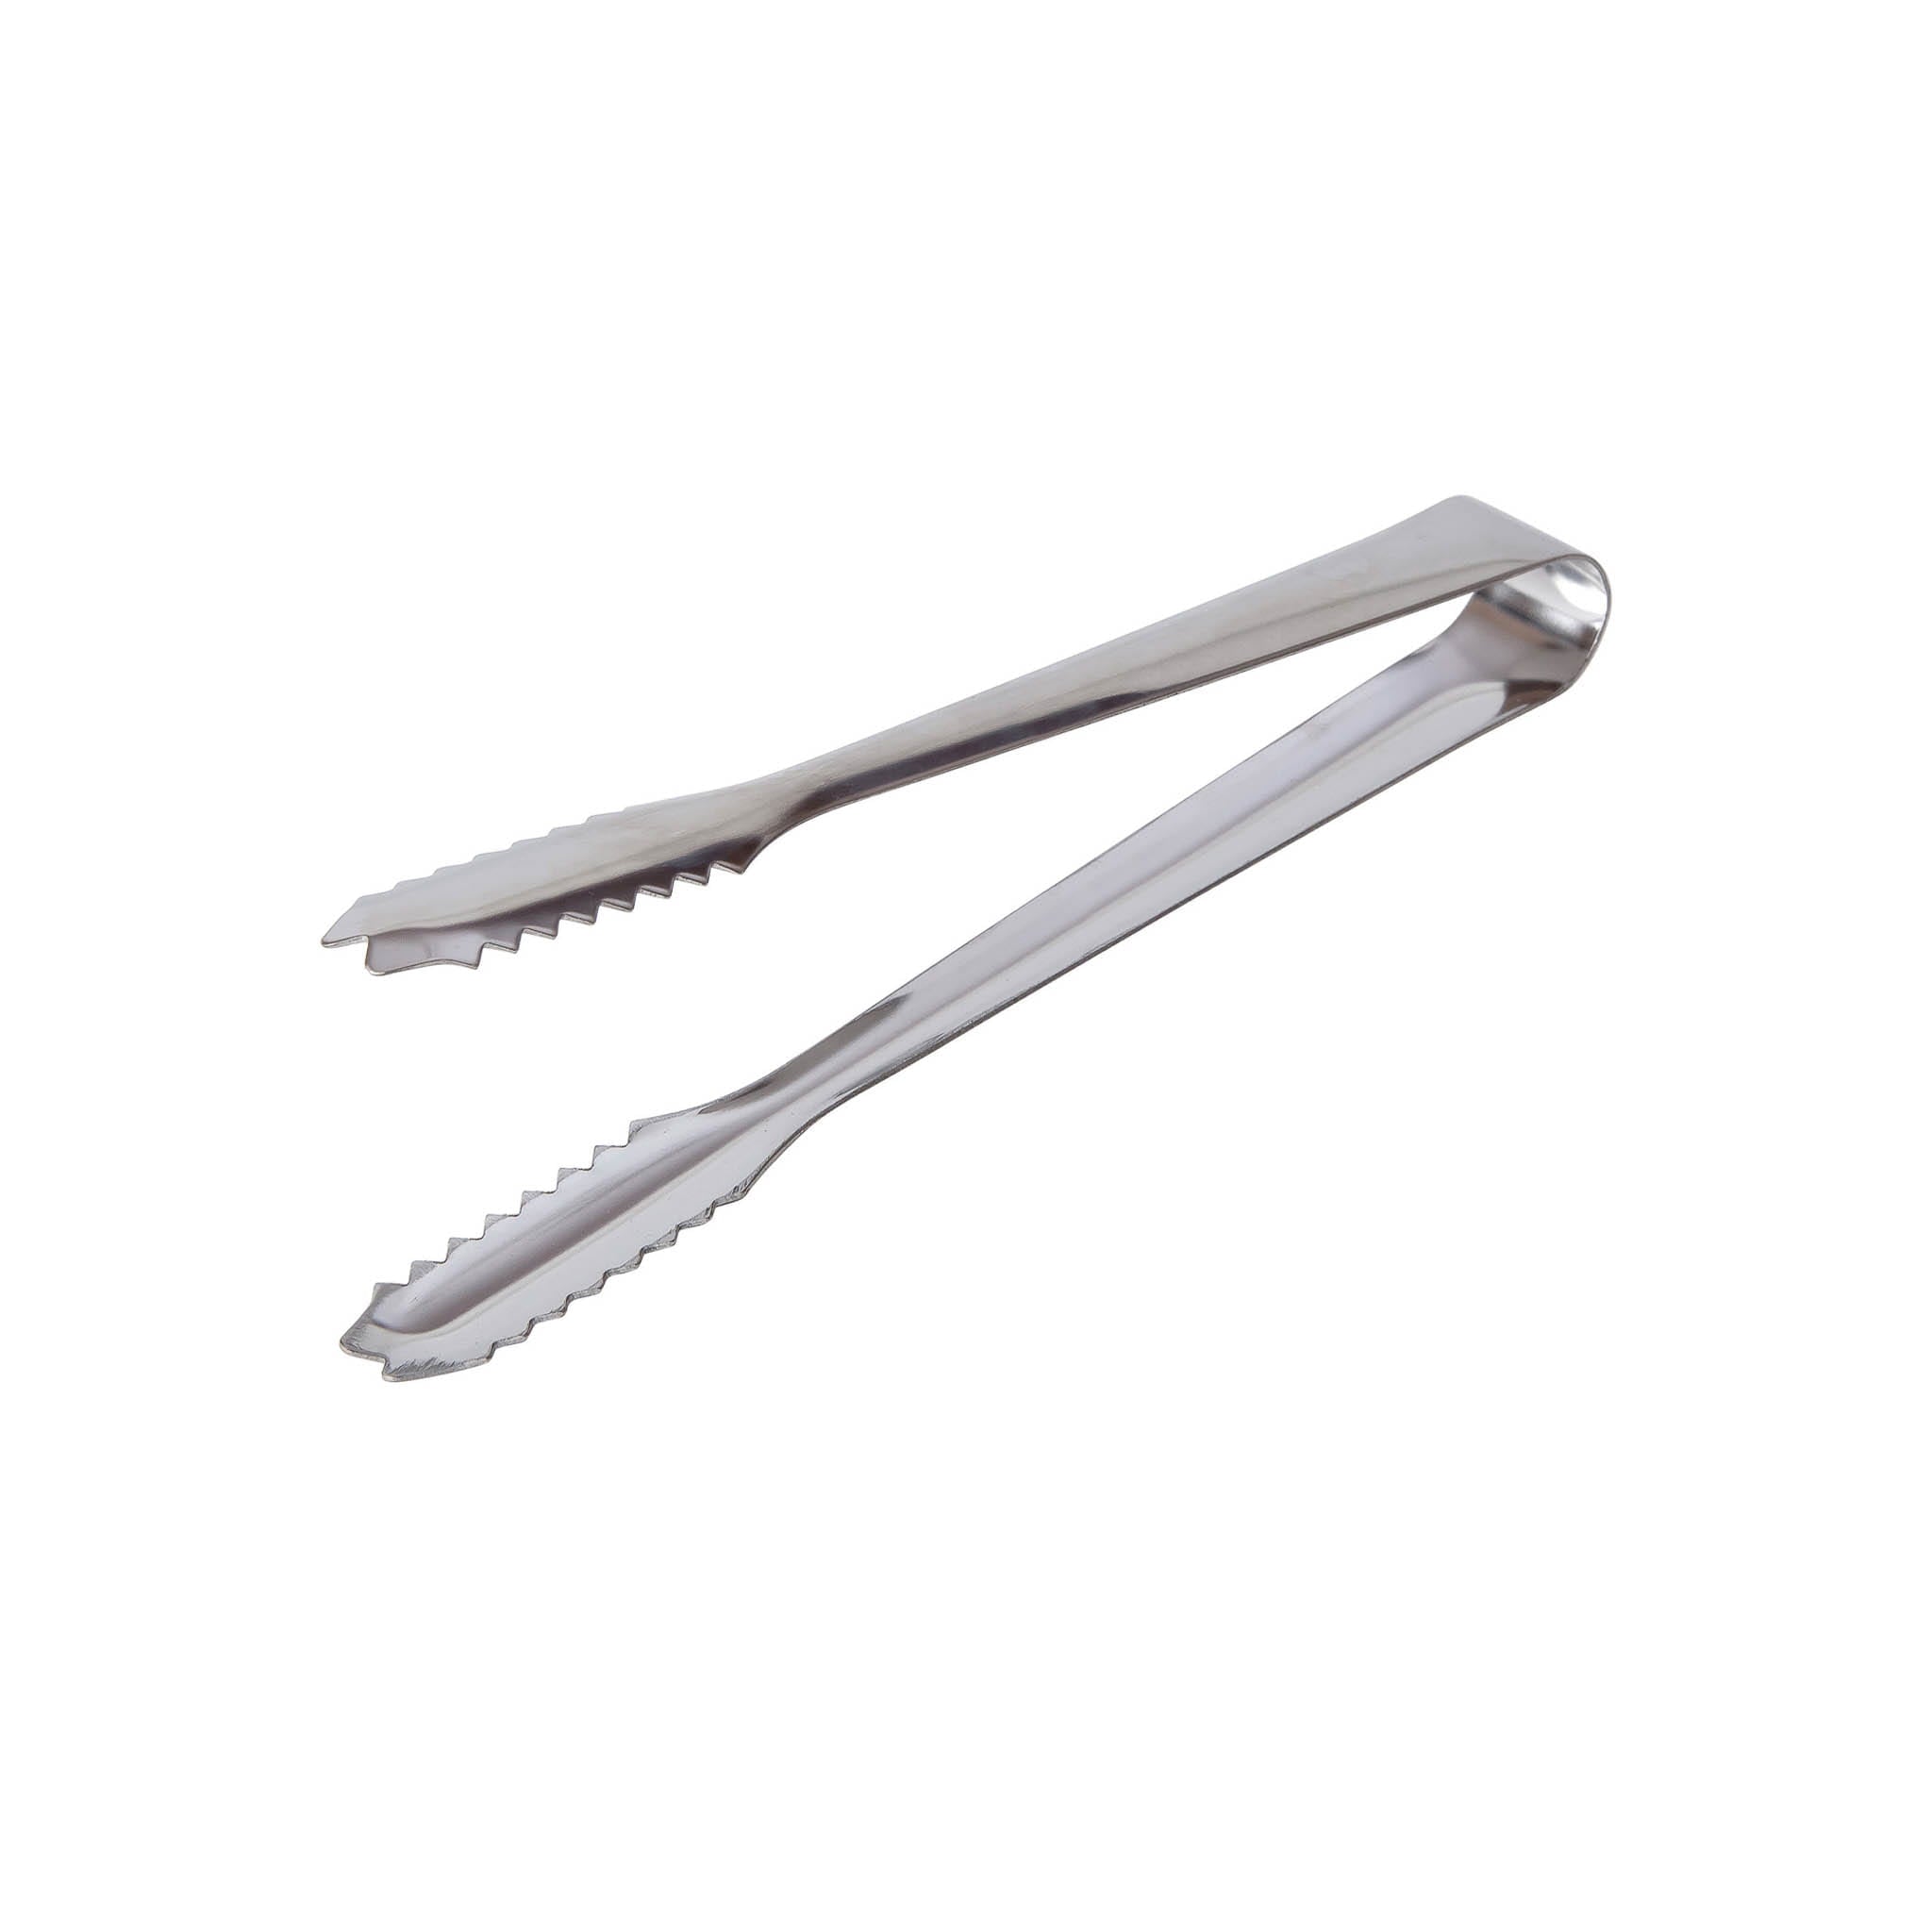 Stainless Steel Ice Tongs, 17.8cm